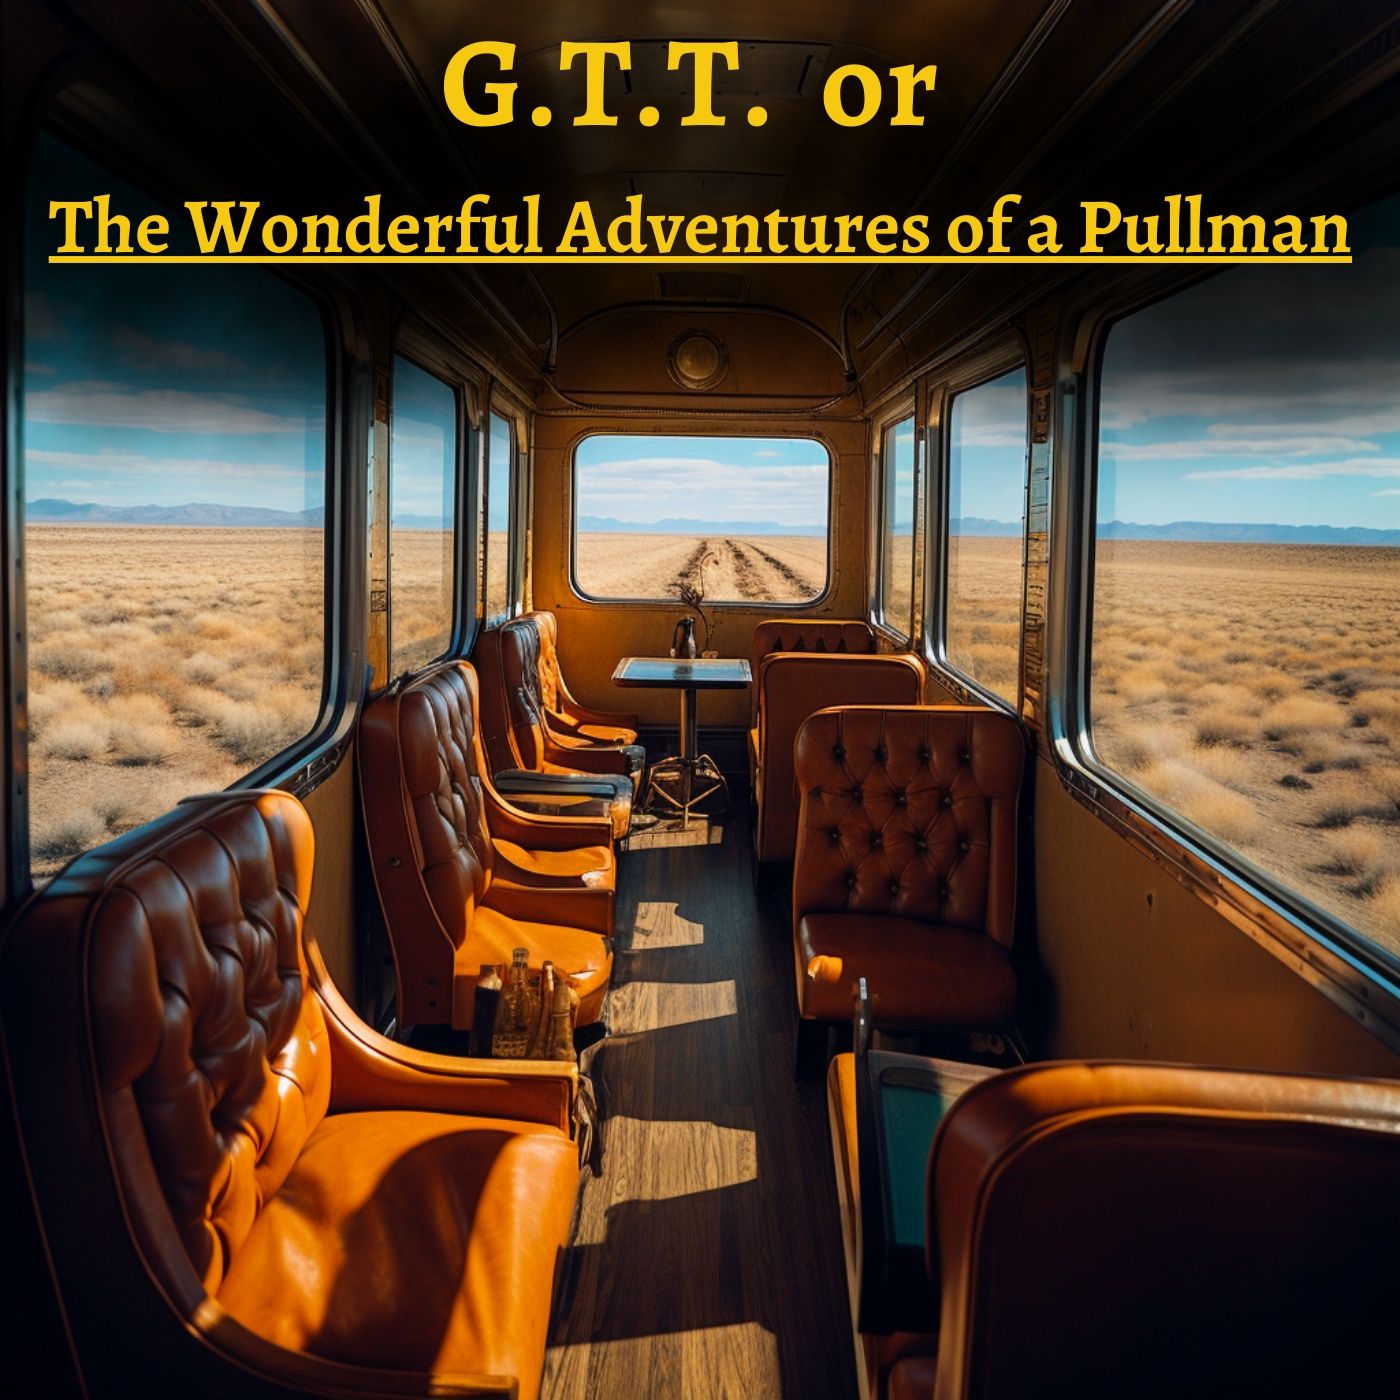 G.T.T., or The Wonderful Adventures of a Pullman